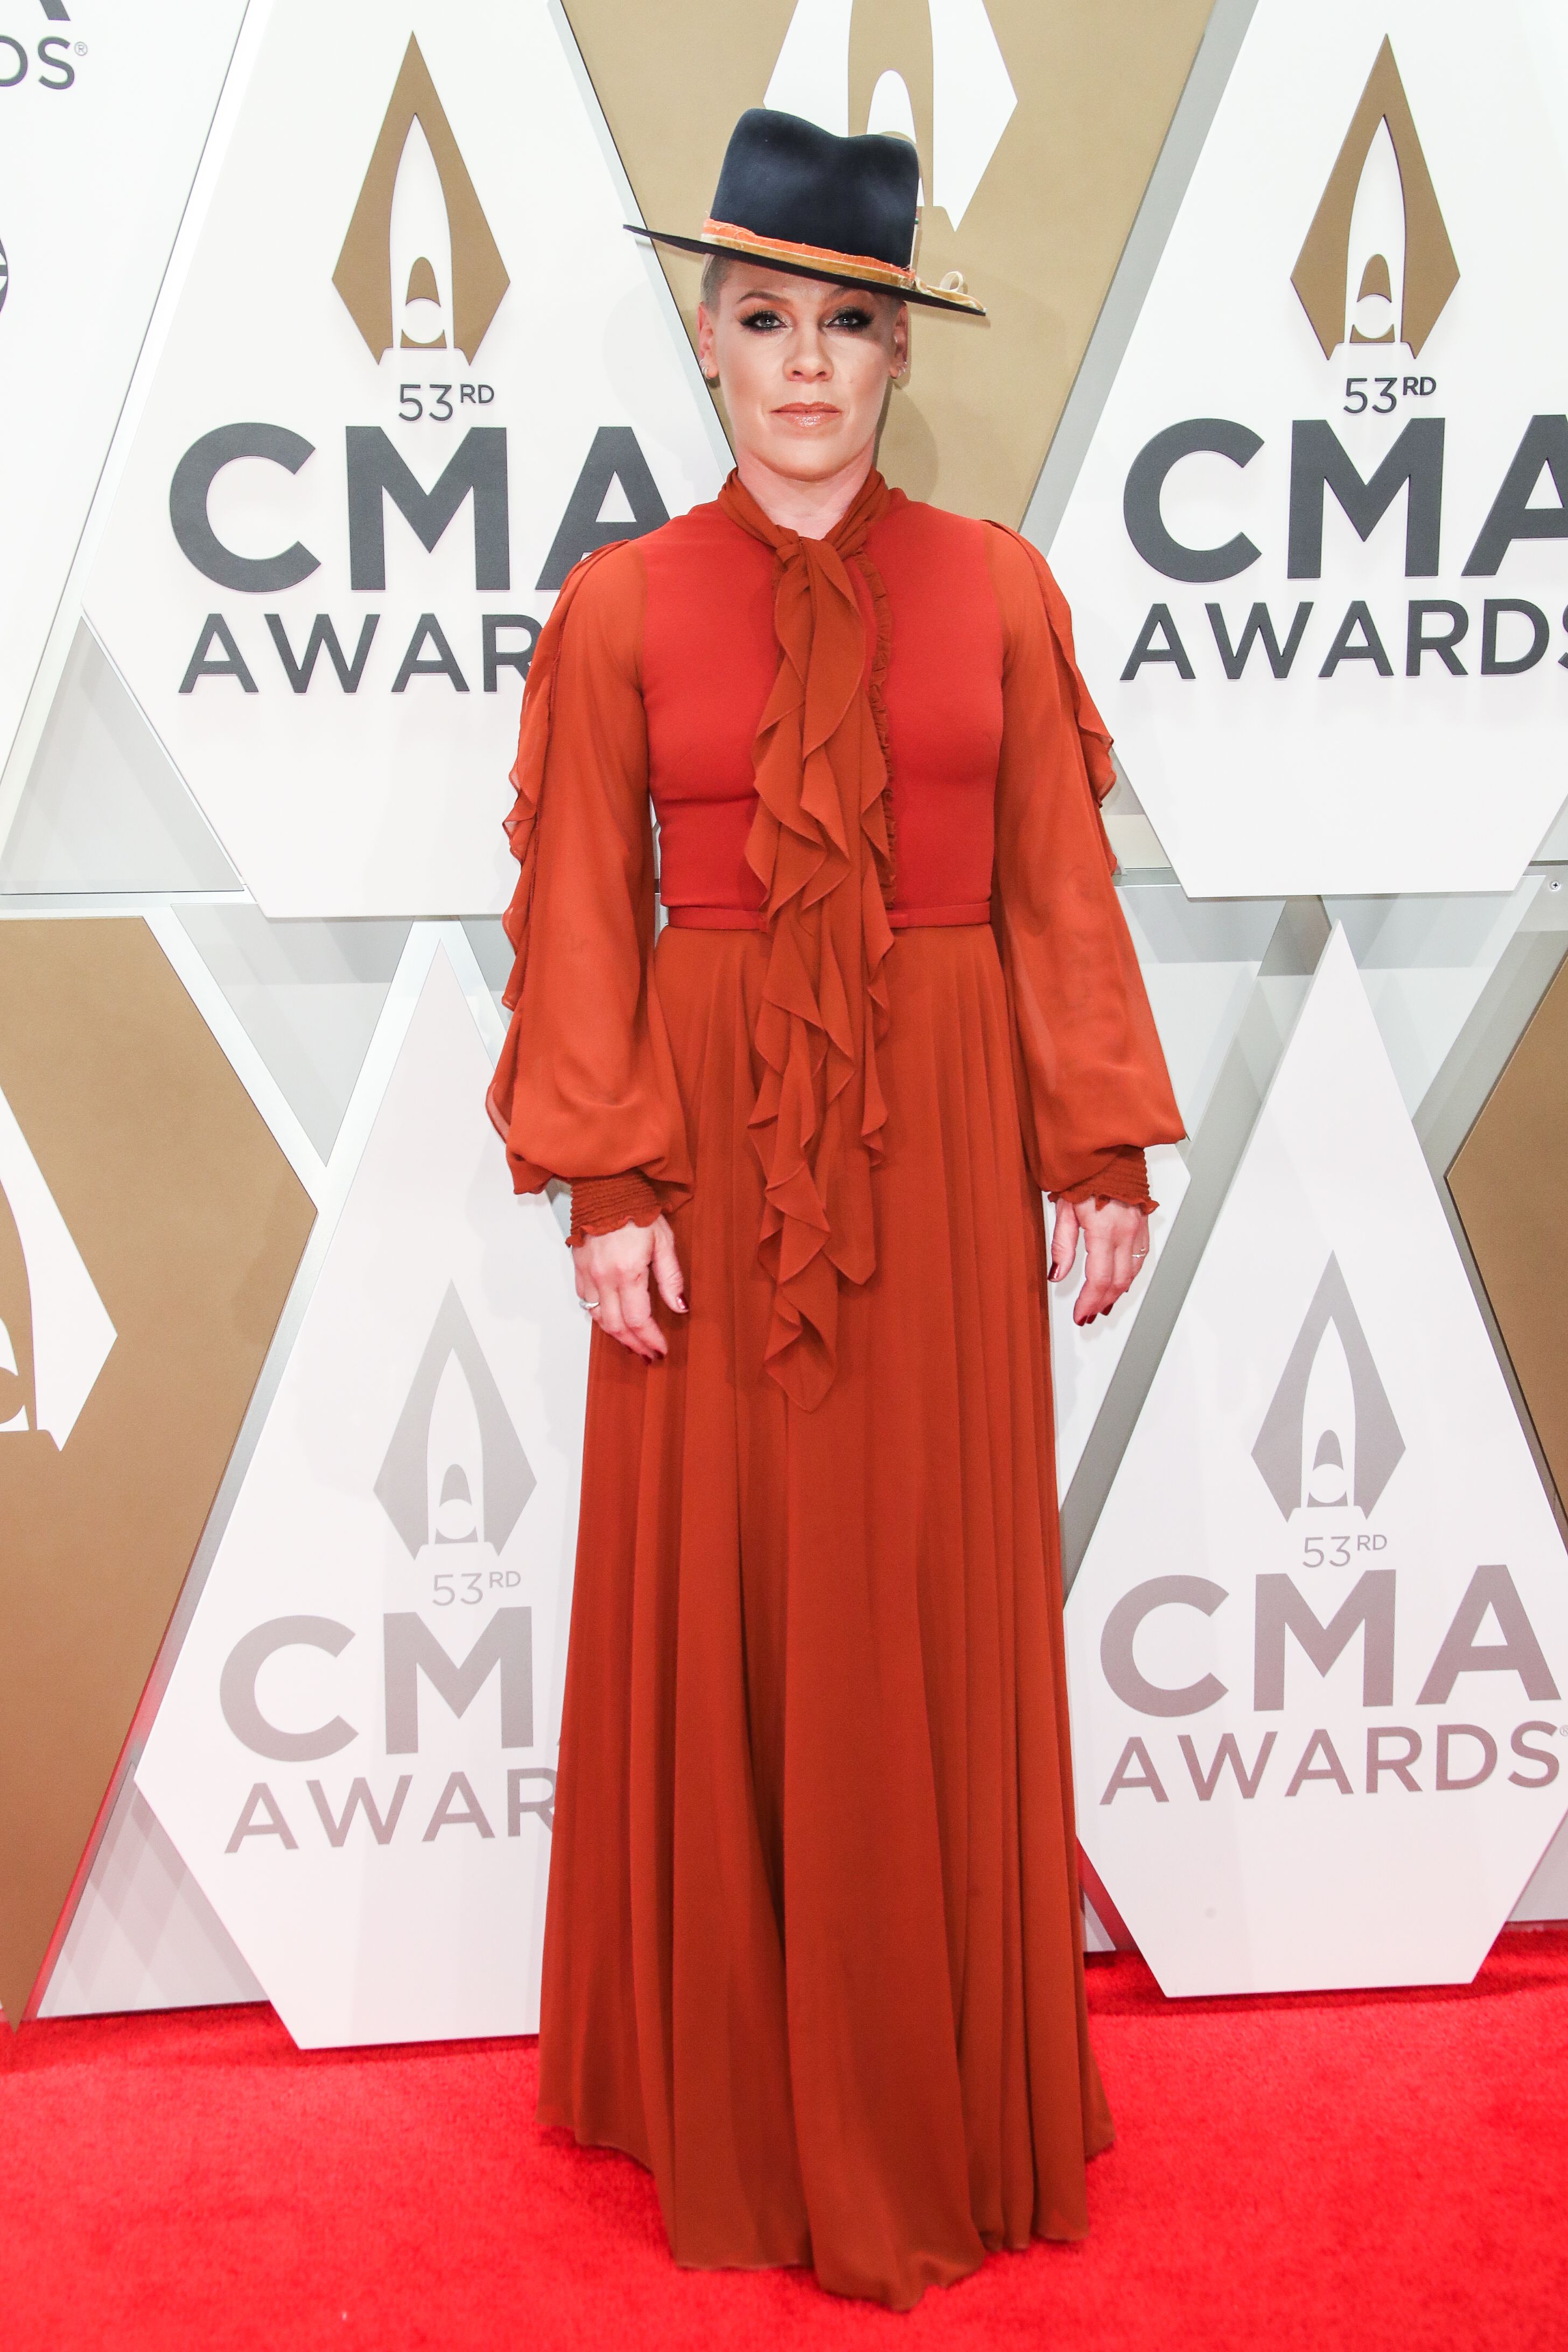 CMAs 2019 Red Carpet See Photos of Celebrities and Performers